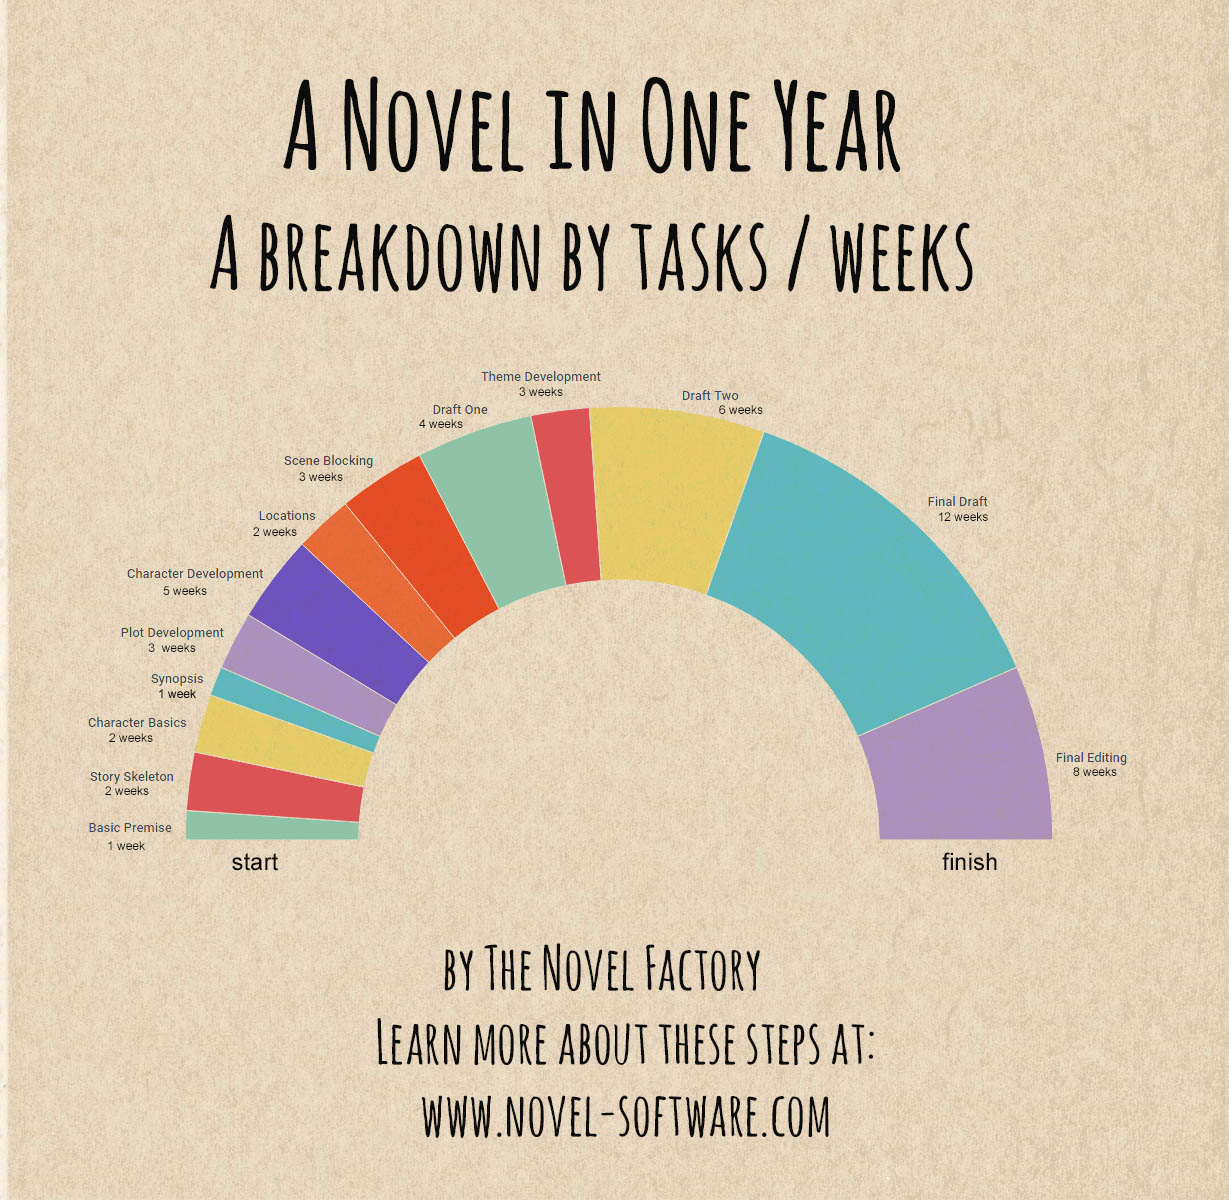 A Novel in One Year (infographic) - Novel Factory